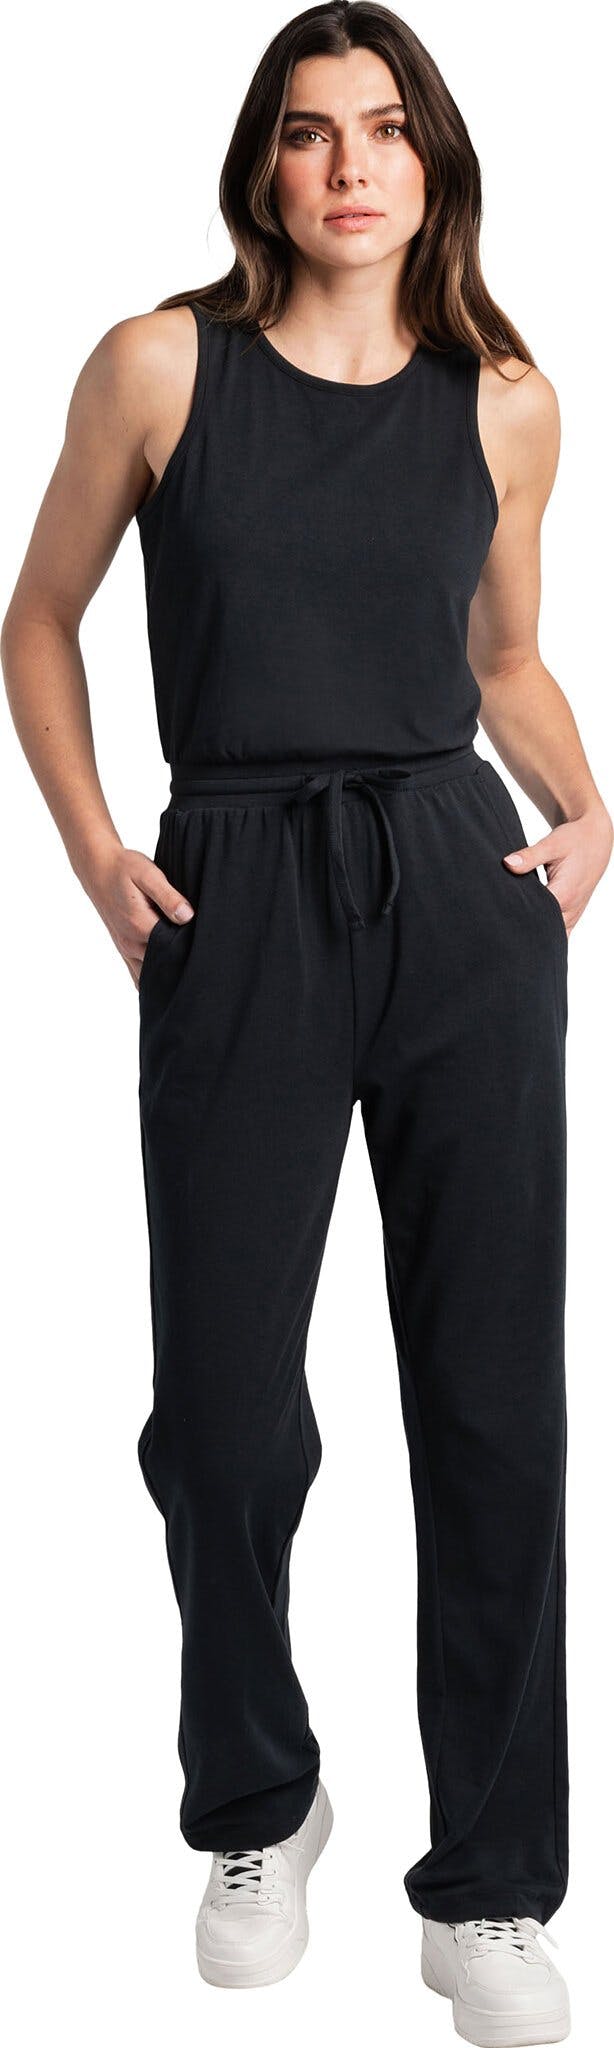 Product image for Effortless Cotton Jumpsuit - Women's